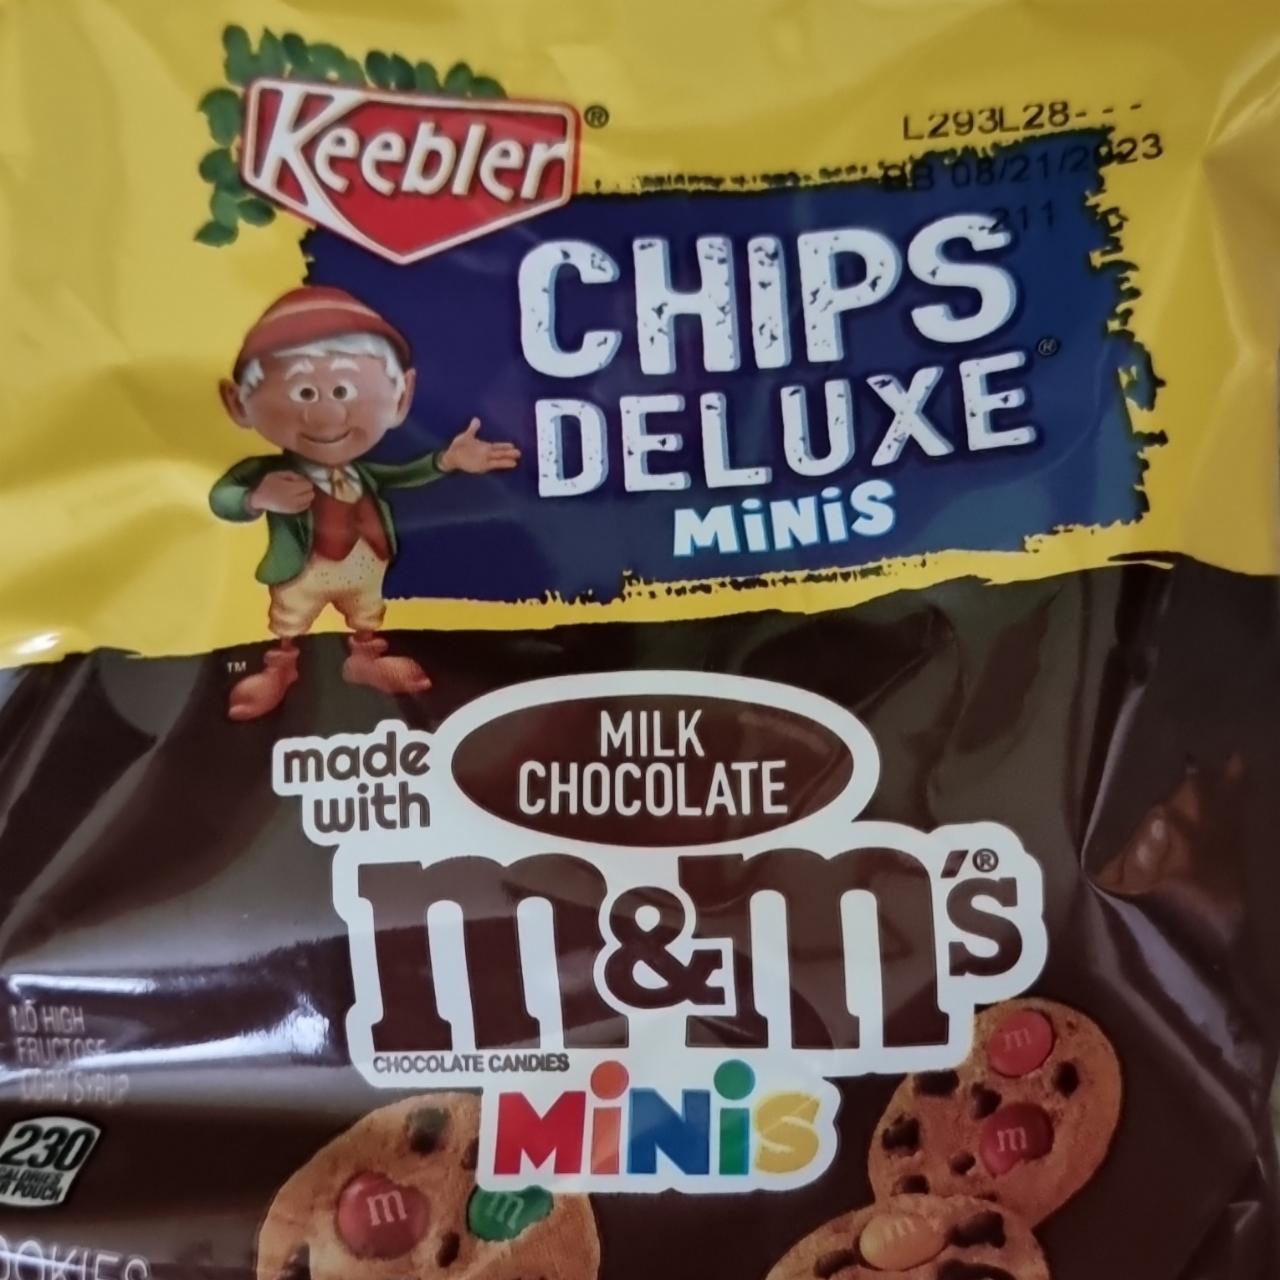 Fotografie - Chips deluxe minis made with milk chocolate M&M's Keebler